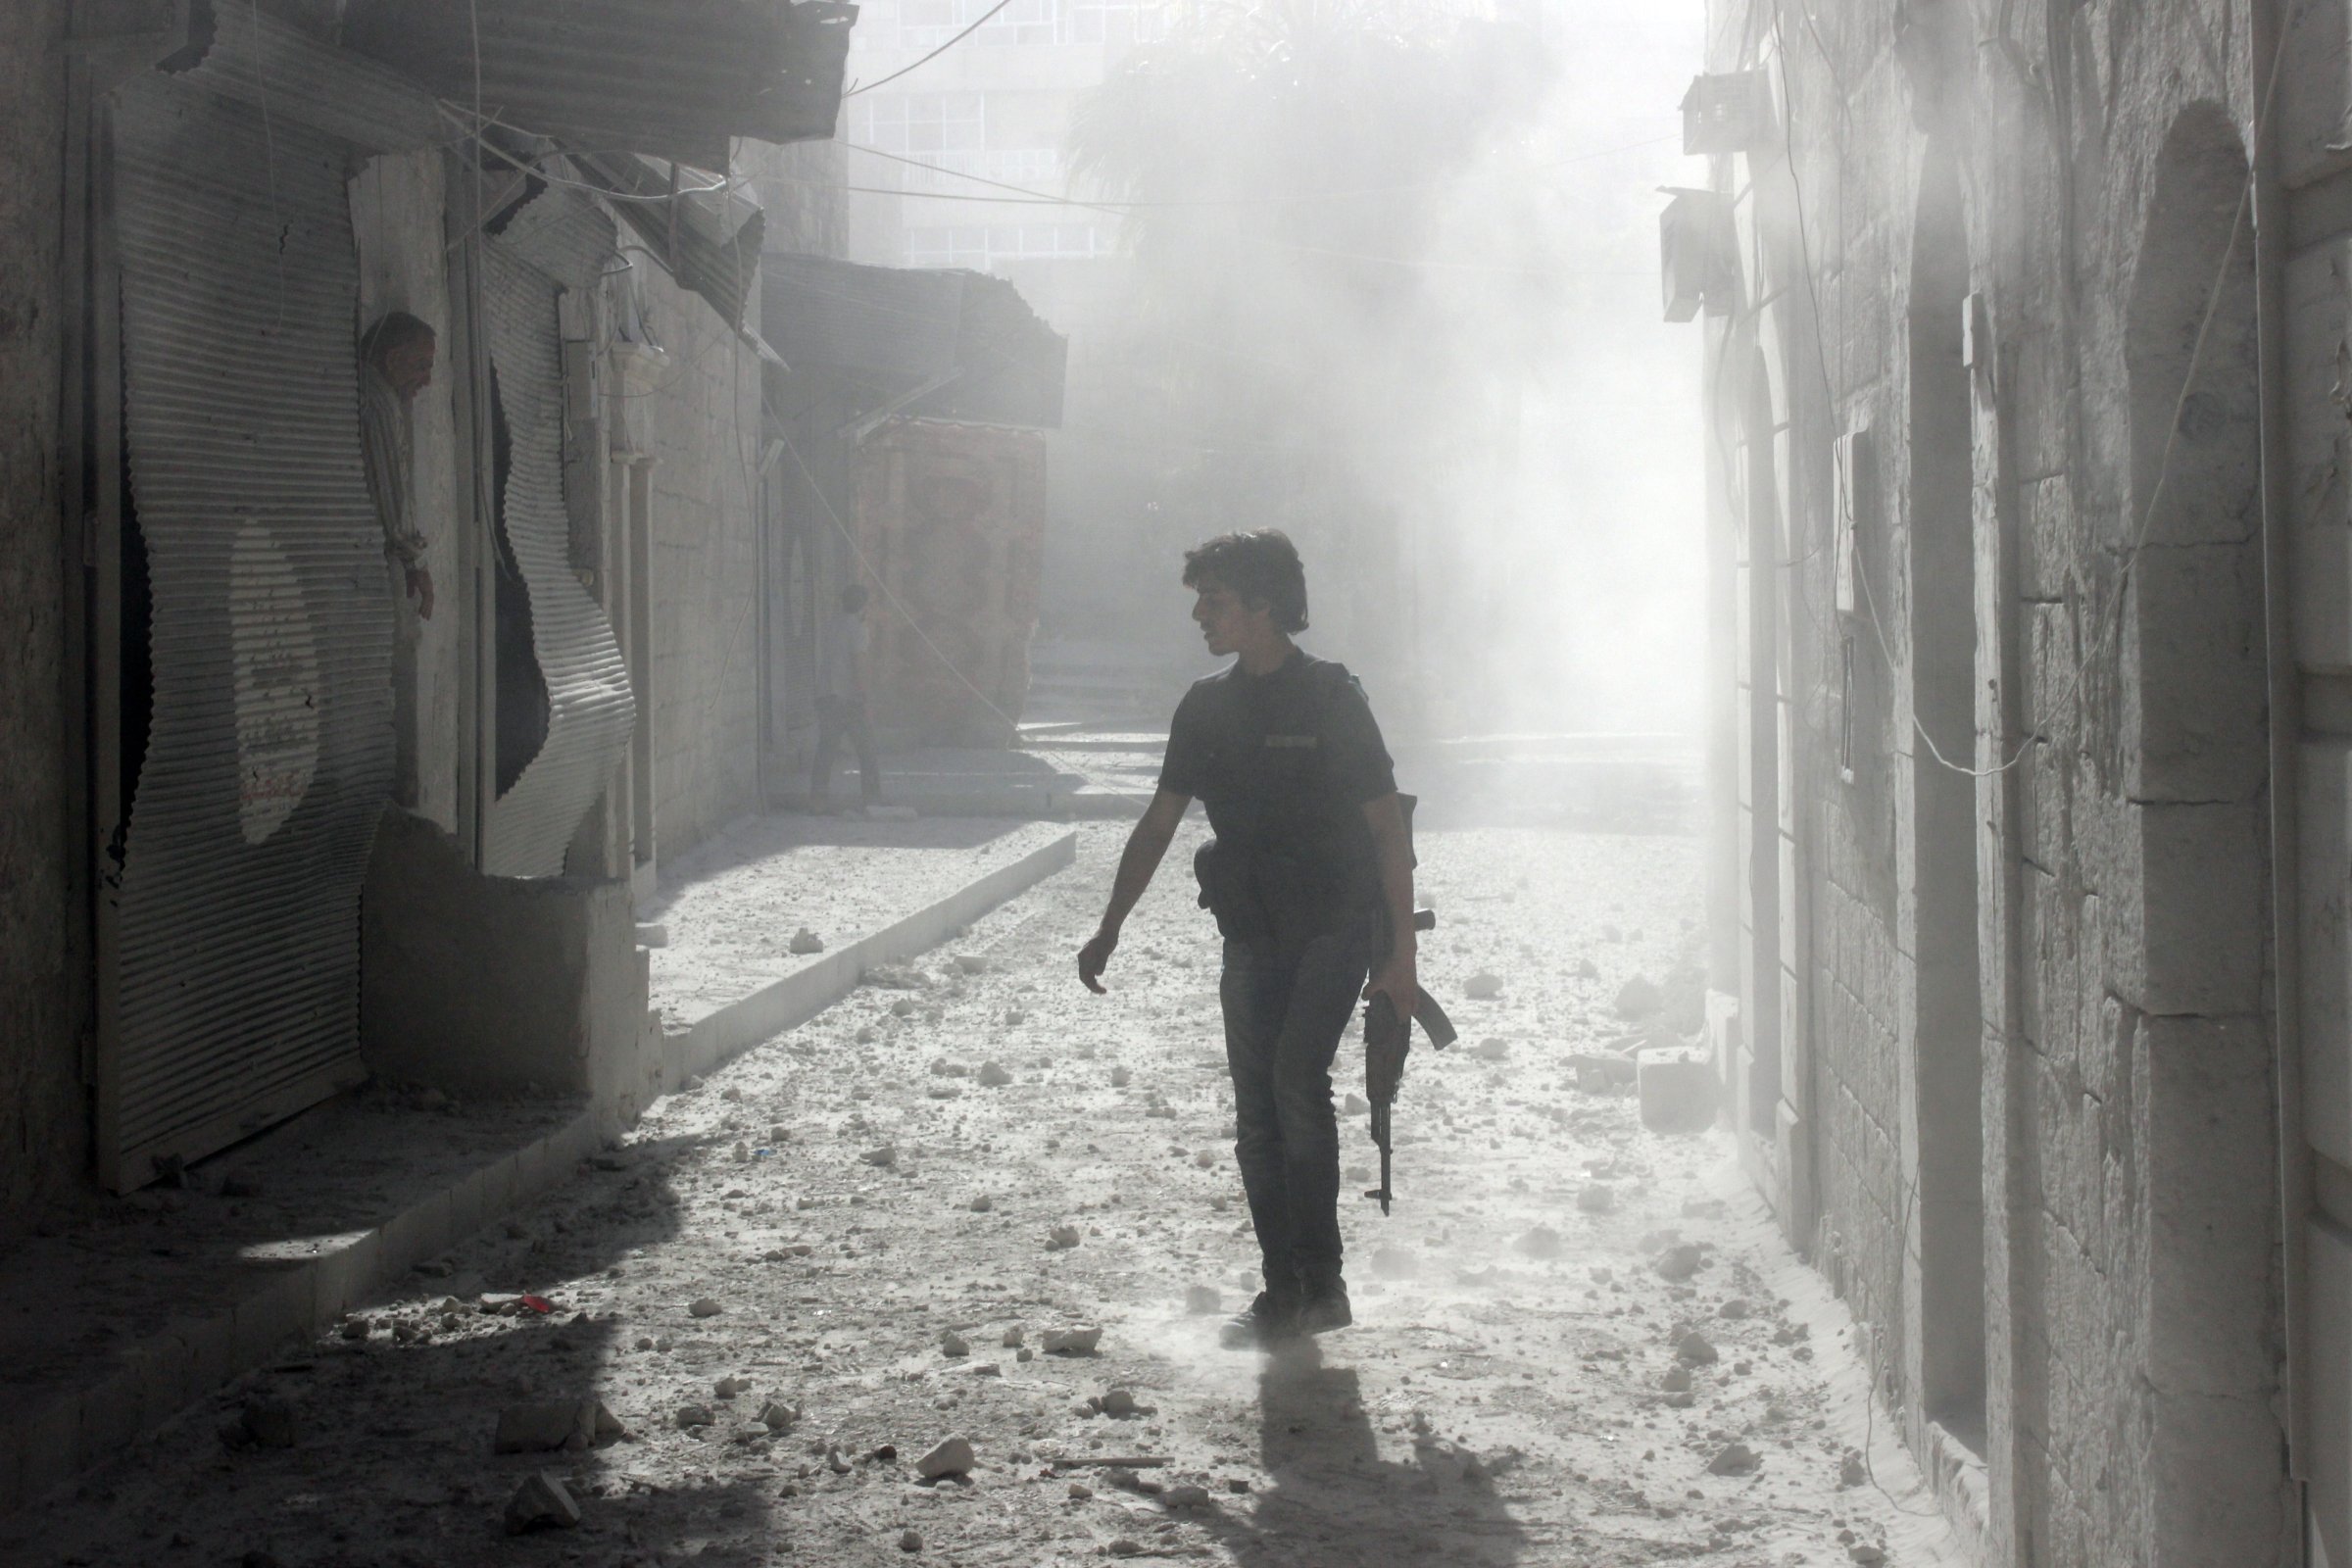 A rebel fighter walks on a street in the Syrian city of Aleppo following a reported bombardment with explosive-packed "barrel bombs" by the government forces on April 27, 2014